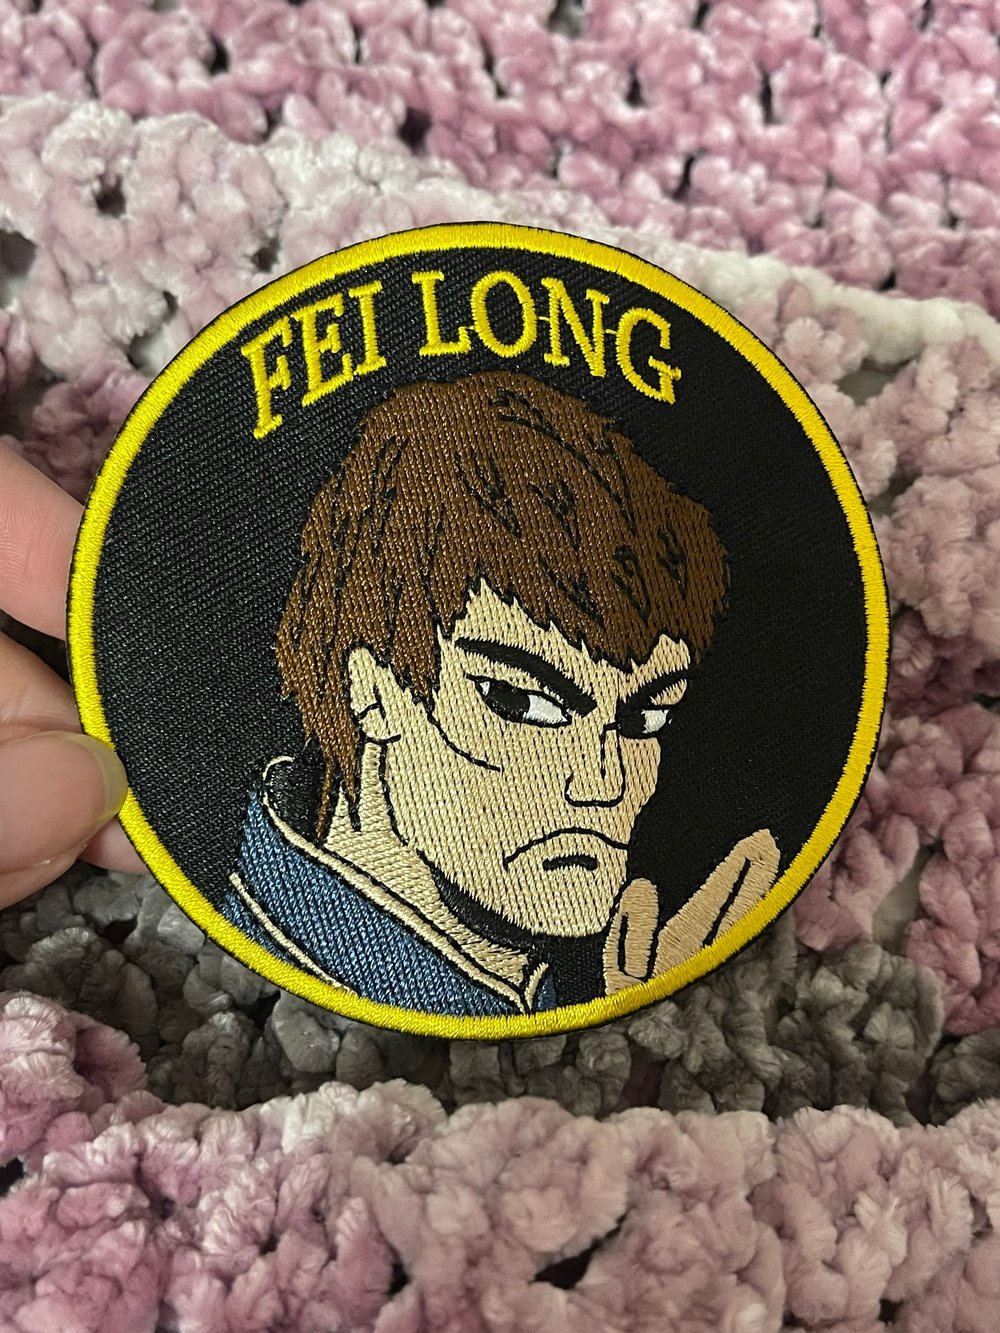 Fei Long - Retro Street Fighter 3.5 inch wide iron on patch